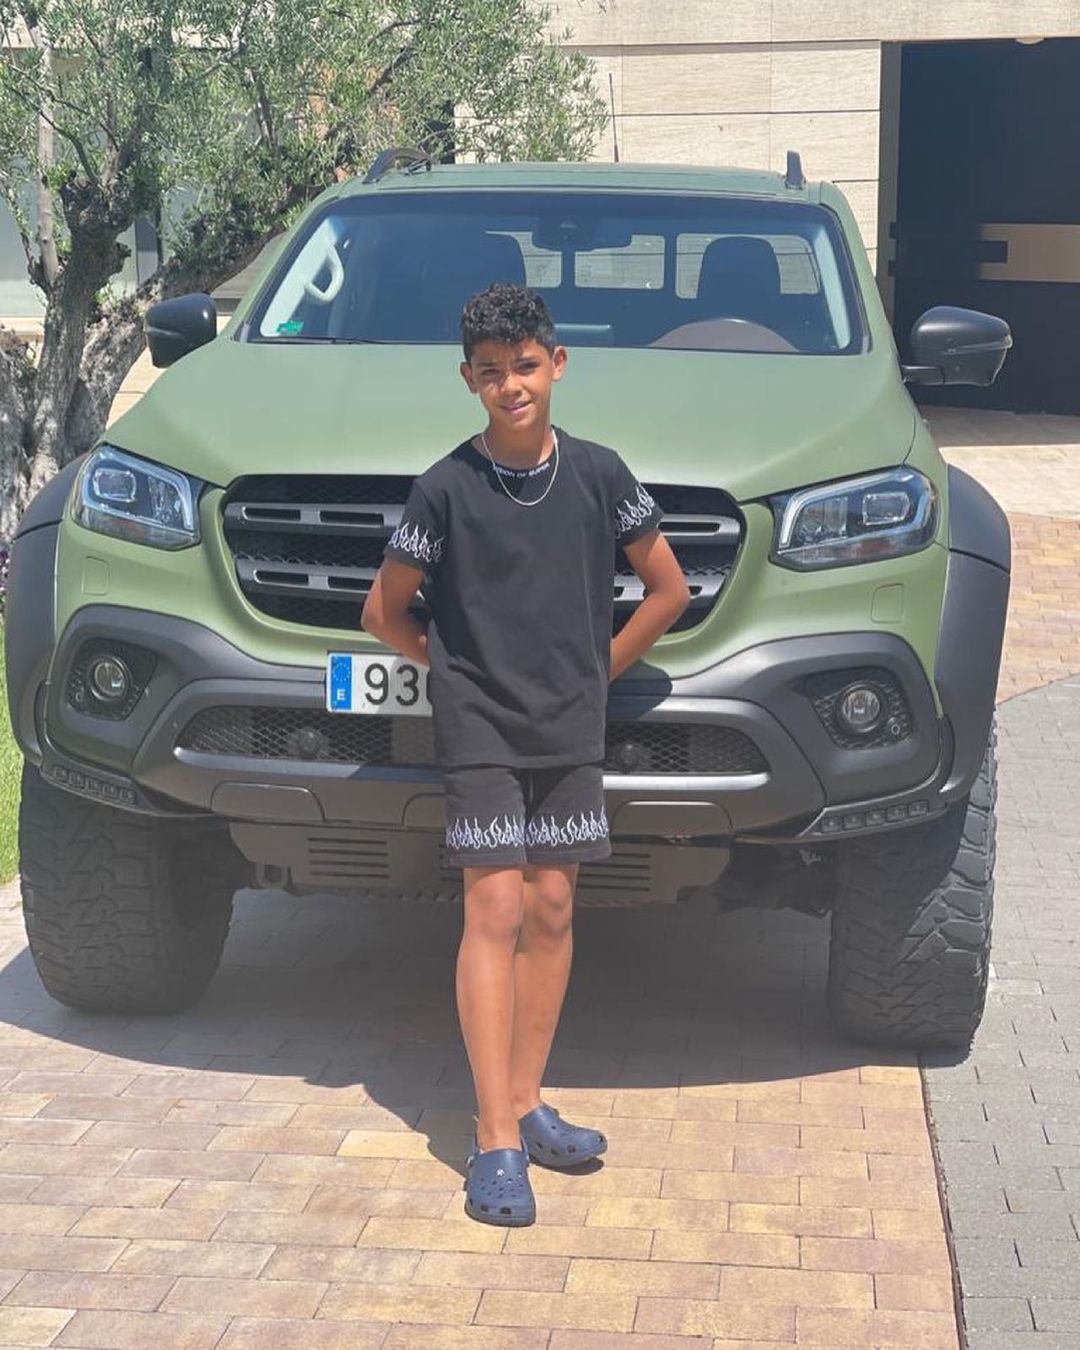 The ‘UNBELIEVABLE’ gift of a car given to Ronaldo Jr. on the occasion of his eleventh birthday has caused quite a stir on social media